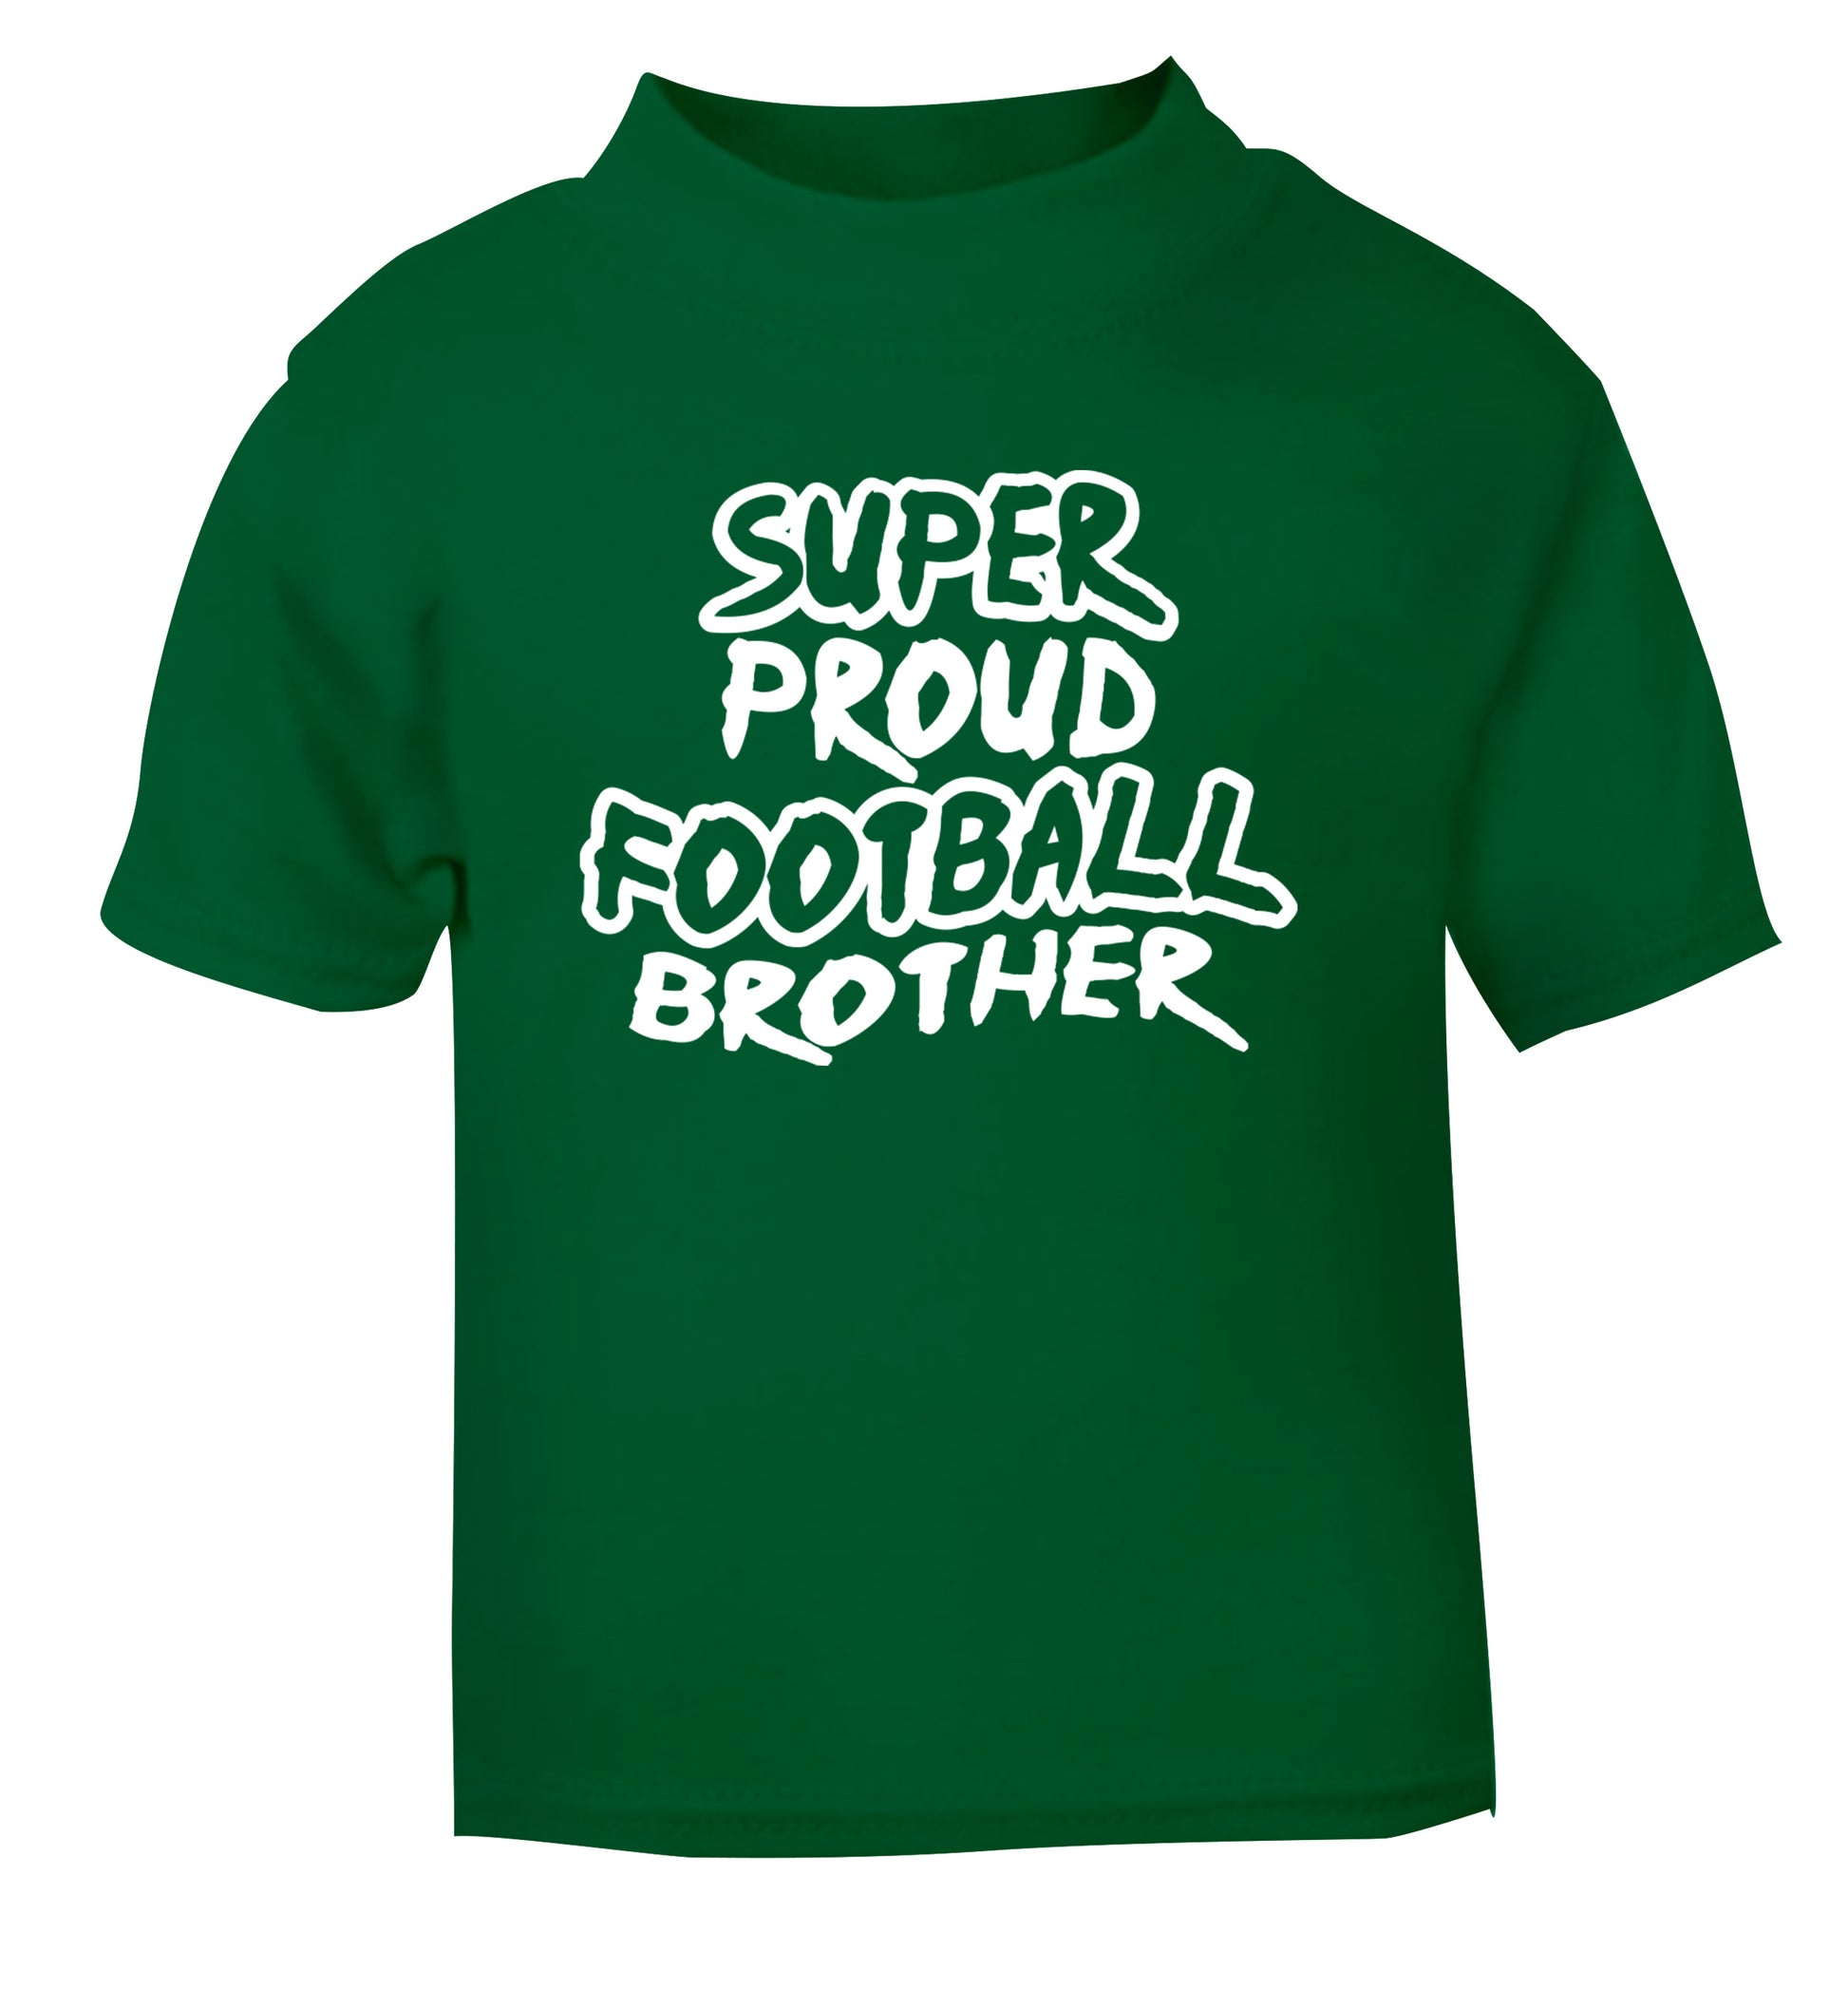 Super proud football brother green Baby Toddler Tshirt 2 Years